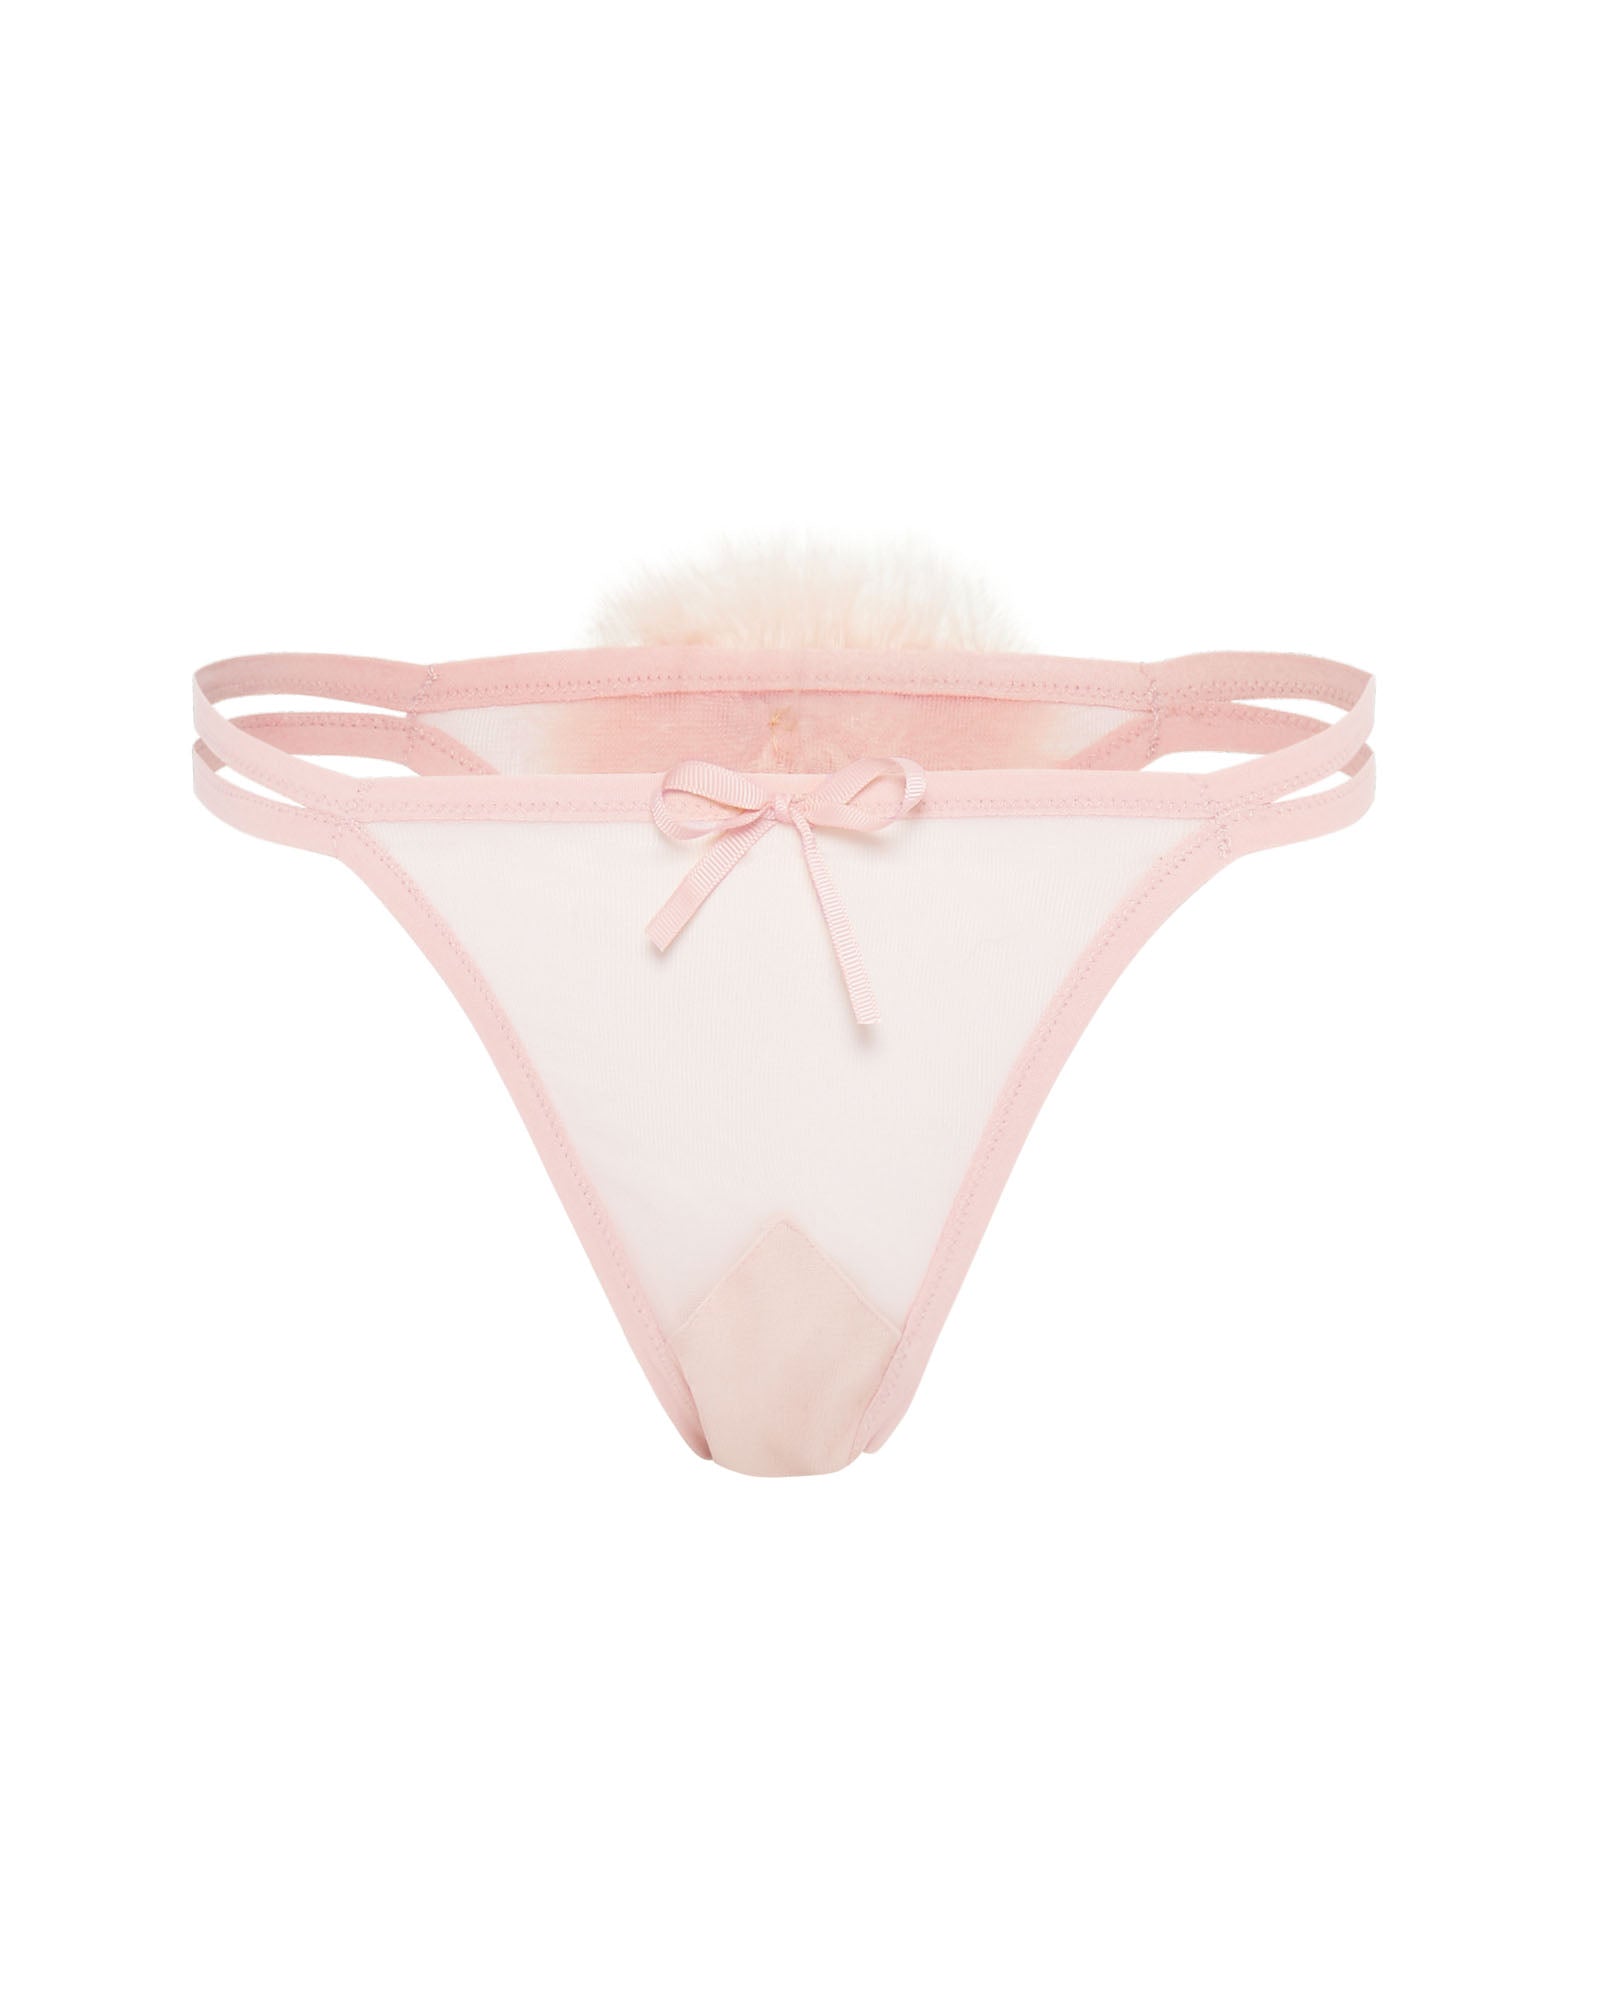 The Camellia G-String